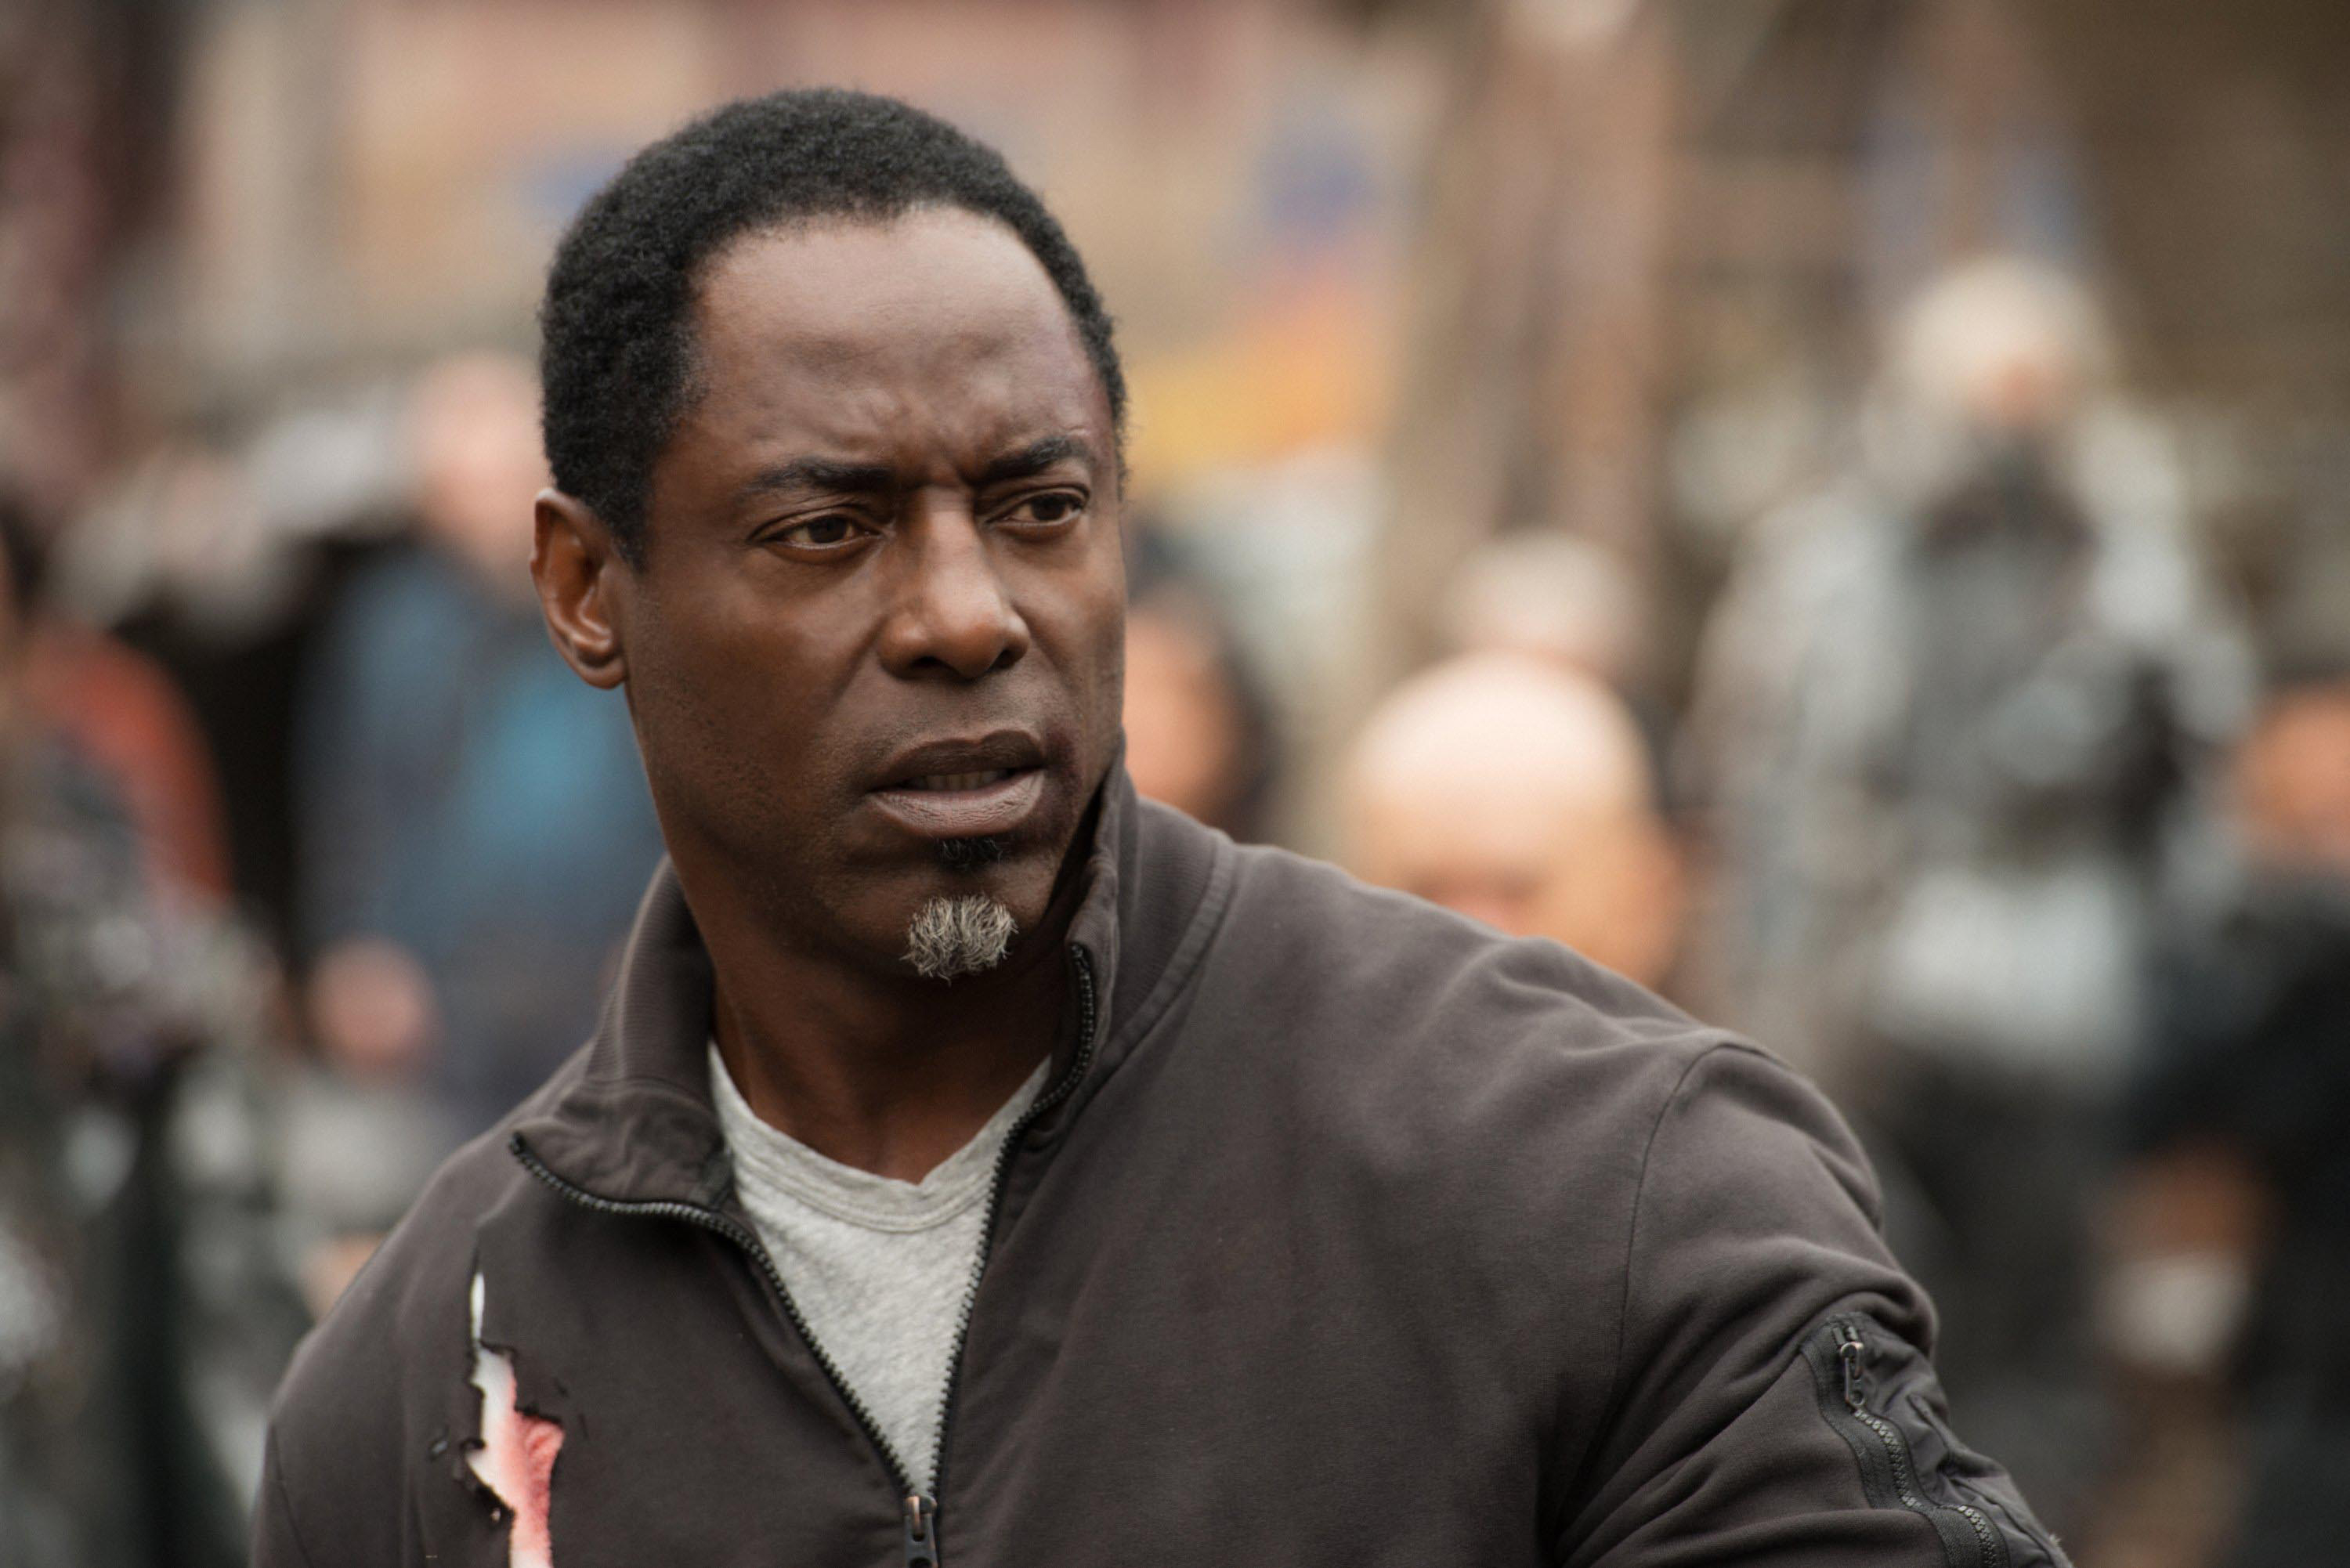 Isaiah Washington wearing a casual jacket, looking concerned in an outdoor setting. Background shows figures and a blurred environment